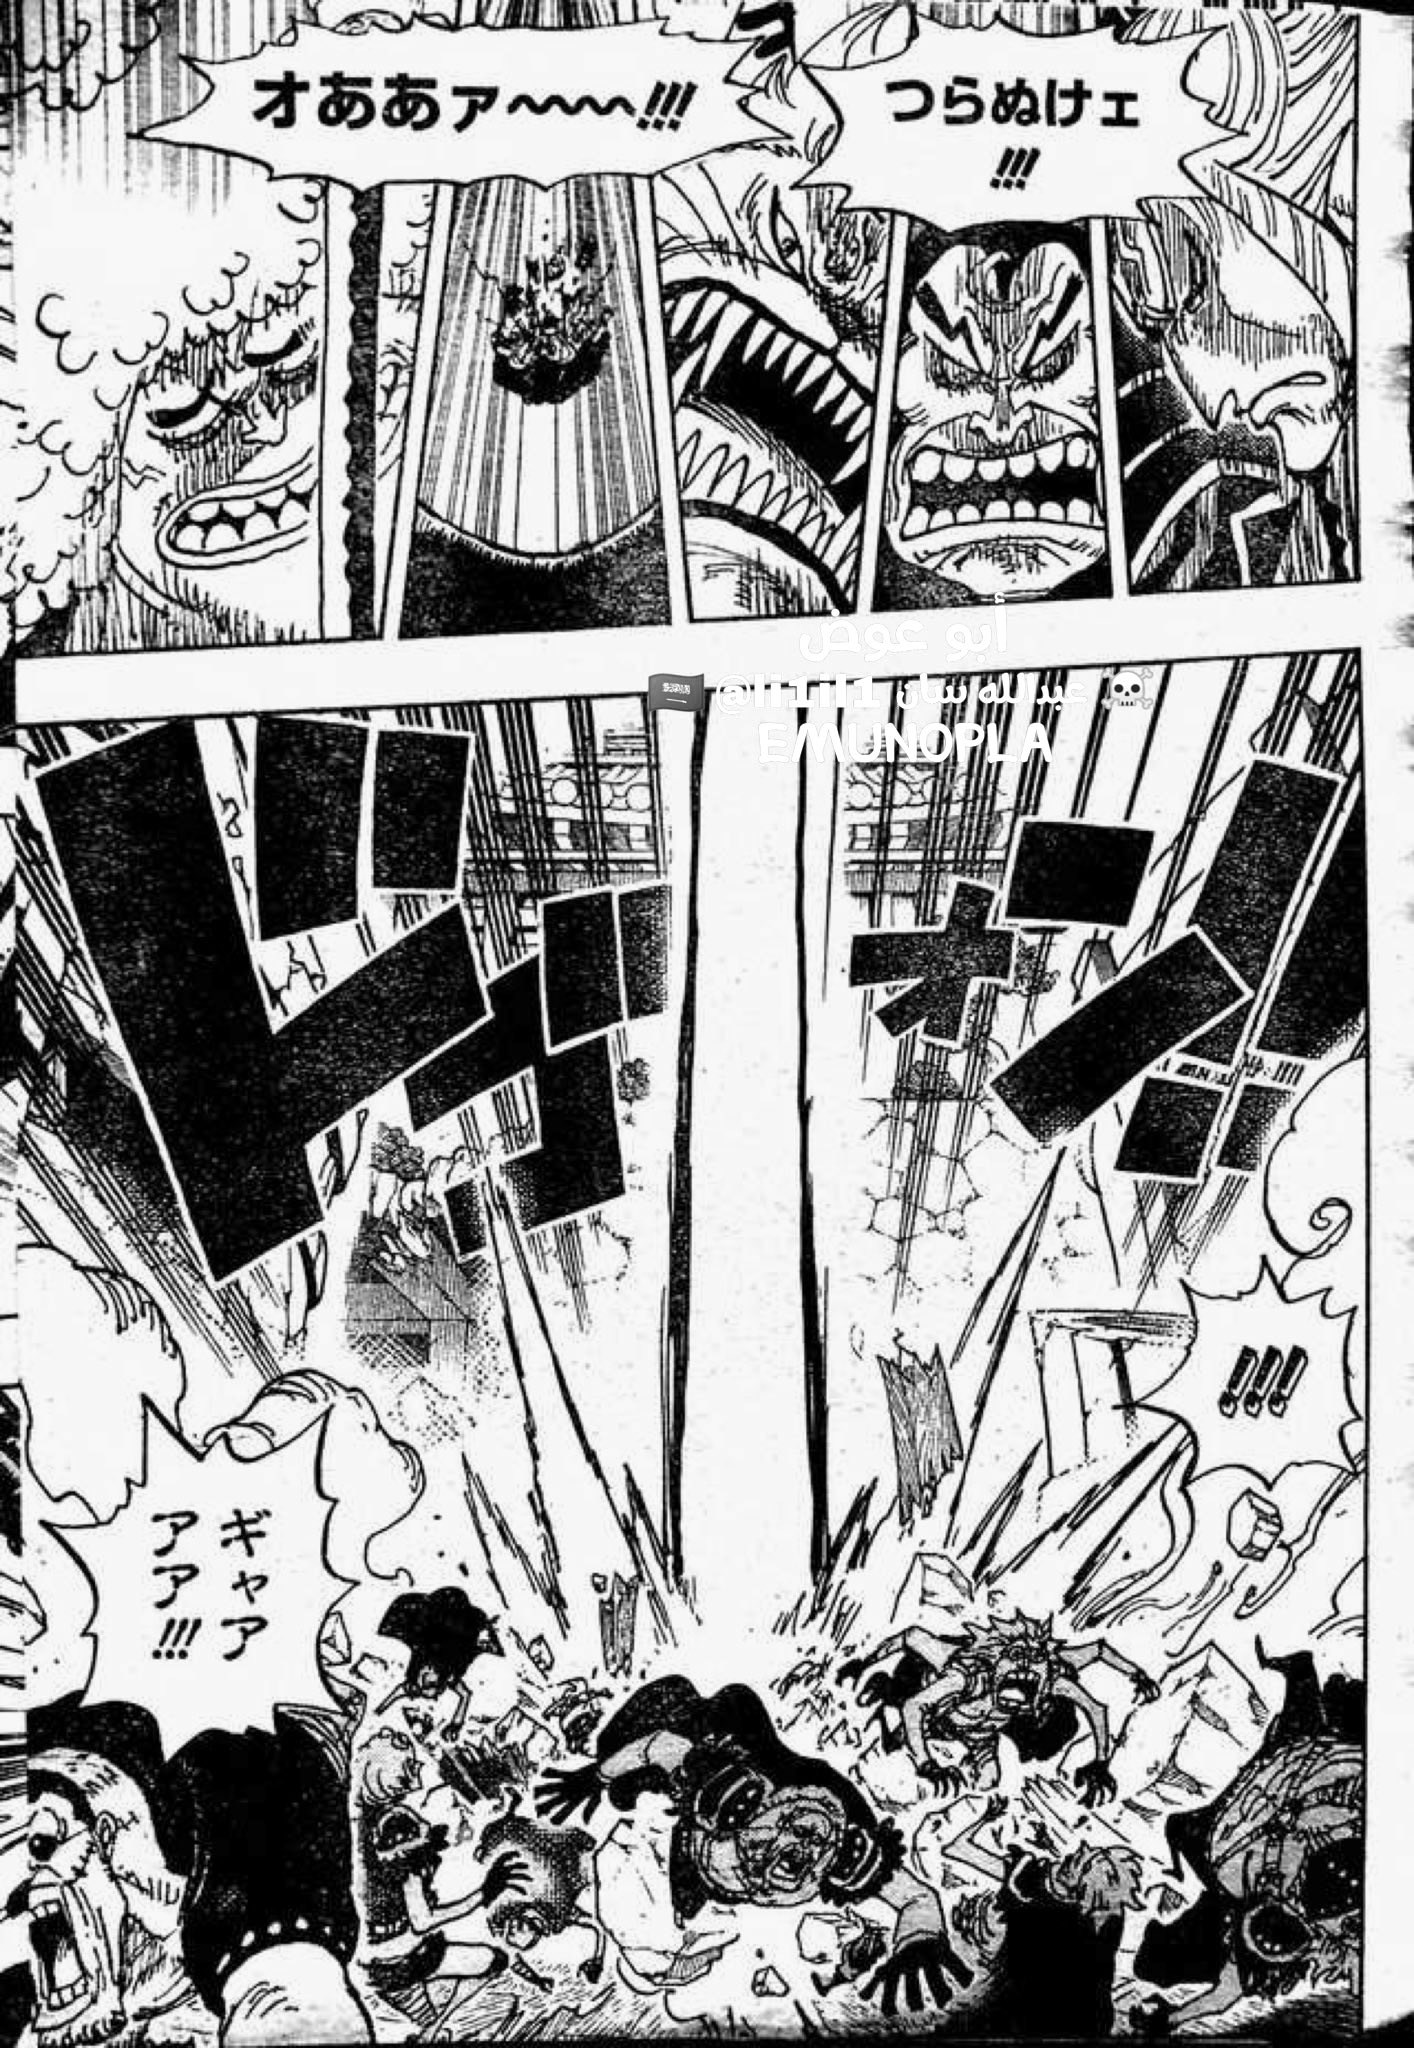 One Piece Chapter 987 Spoilers Telegraph